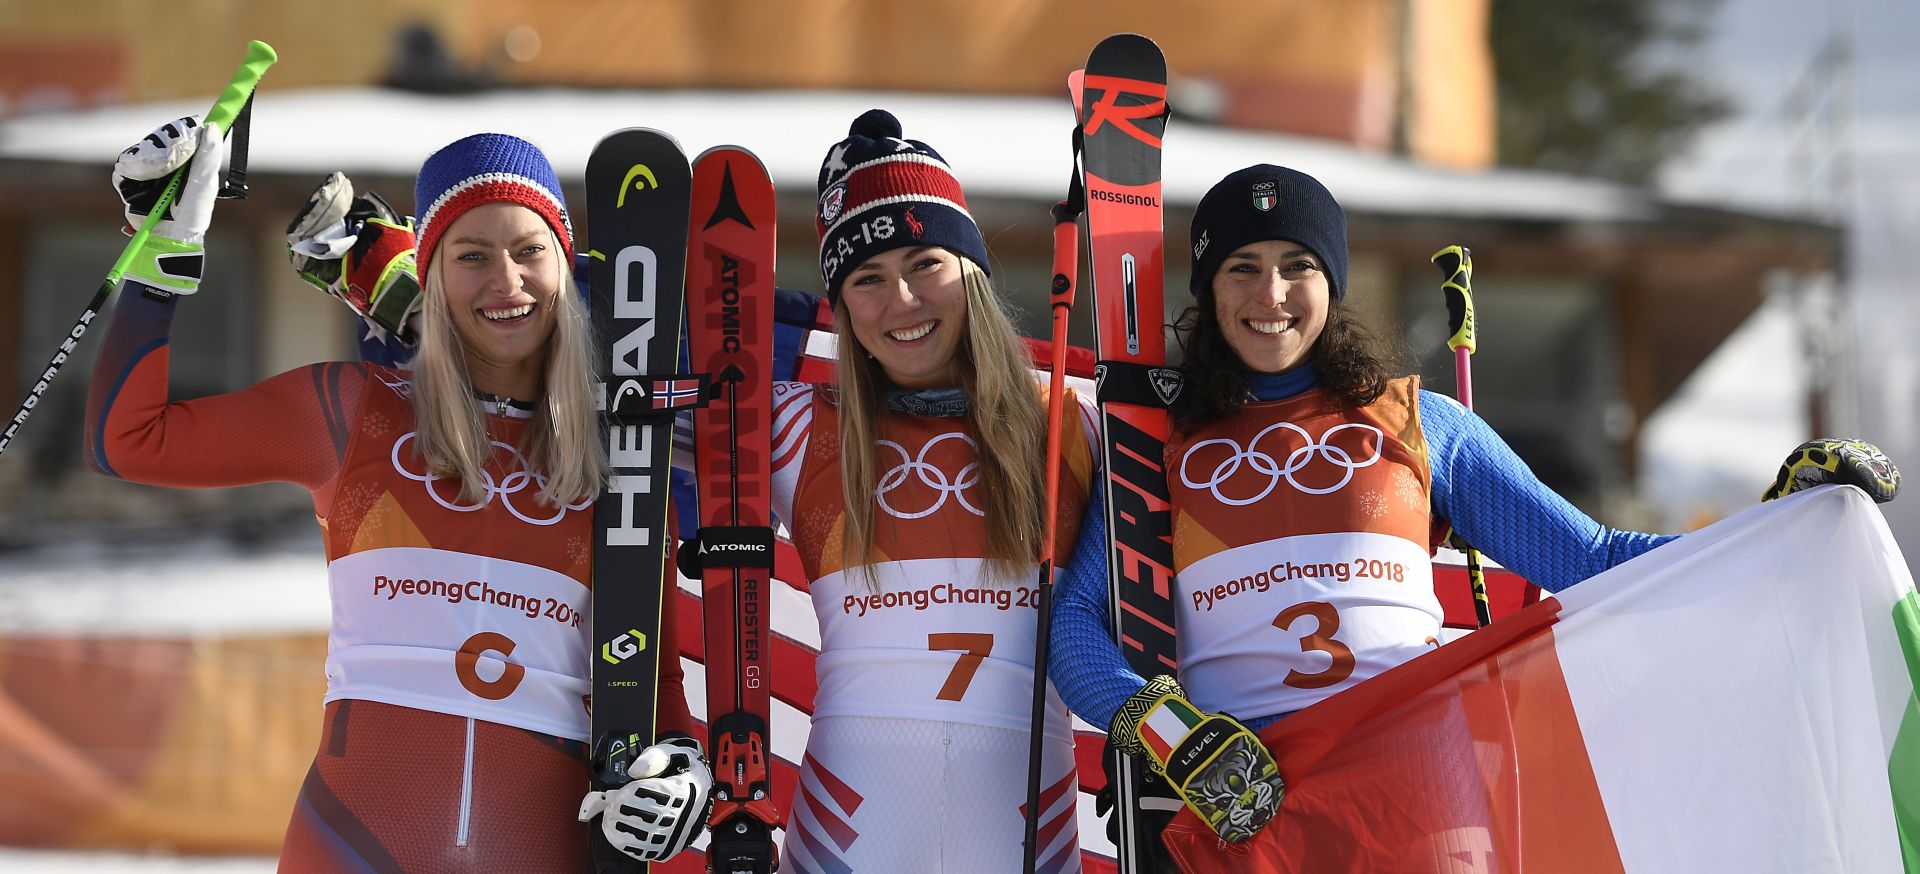 epa06527229 (L-R) Silver medal winner Ragnhild Mowinckel  of Norway, gold medal winner Mikaela Shiffrin of the USA, bronze medal winner Federica Brignone of Italy pose during the venue ceremony of the Women's Giant Slalom race at the Yongpyong Alpine Centre during the PyeongChang 2018 Olympic Games, South Korea, 15 February 2018.  EPA/DANIEL KOPATSCH